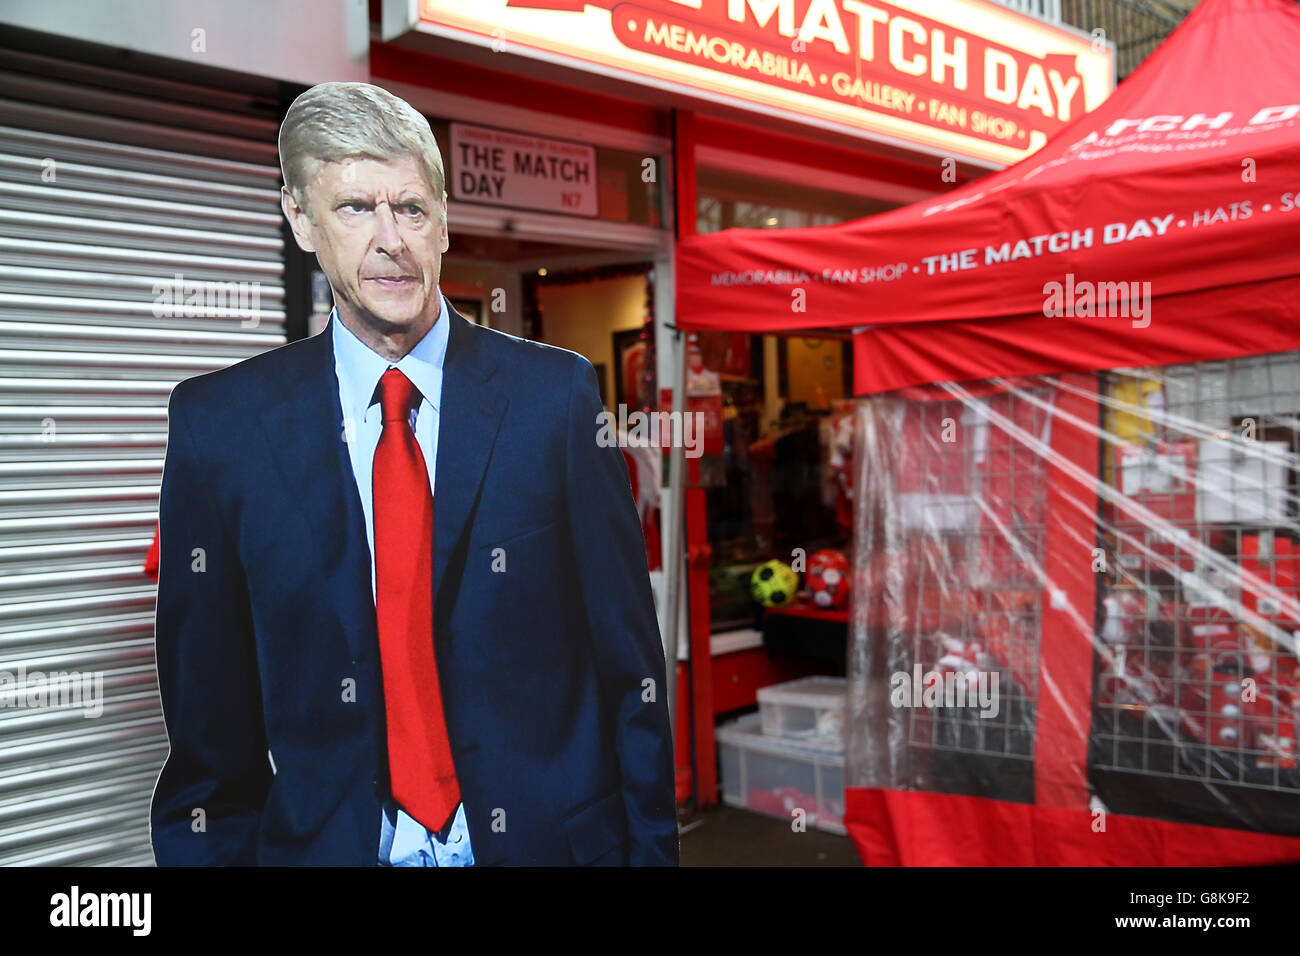 A cardboard cutout of Arsenal manager Arsene Wenger prior to the Barclays Premier League match at the Emirates Stadium, London. Stock Photo